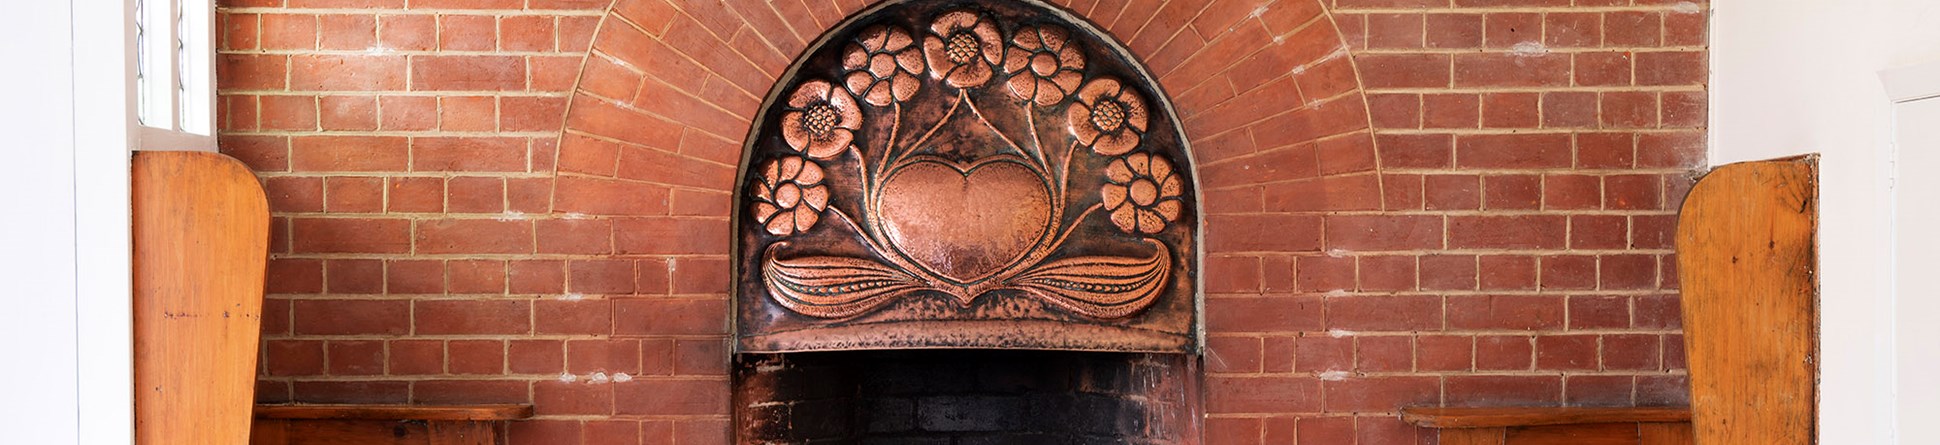 Interior of dining room with the ingle nook on its western wall having fixed seats at either side with cut-out heart shapes. The hearth has a semi-circular opening and a beaten copper fire hood. The copper fire hood has a central heart surrounded by flowers and leaves, emblematic of the Immaculate Heart of Mary.